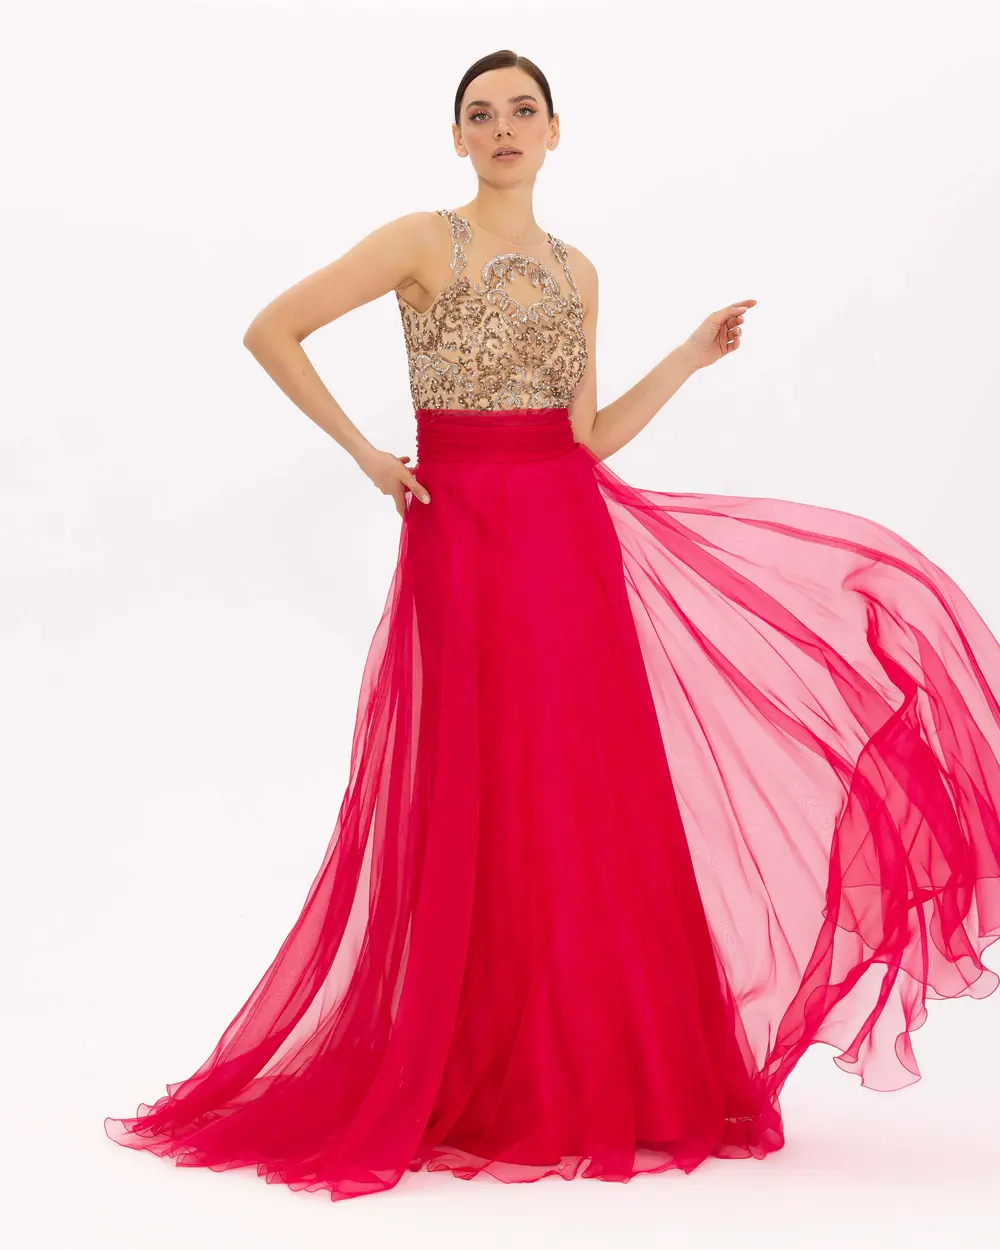 Tulle Evening Dress with Indian Accessories